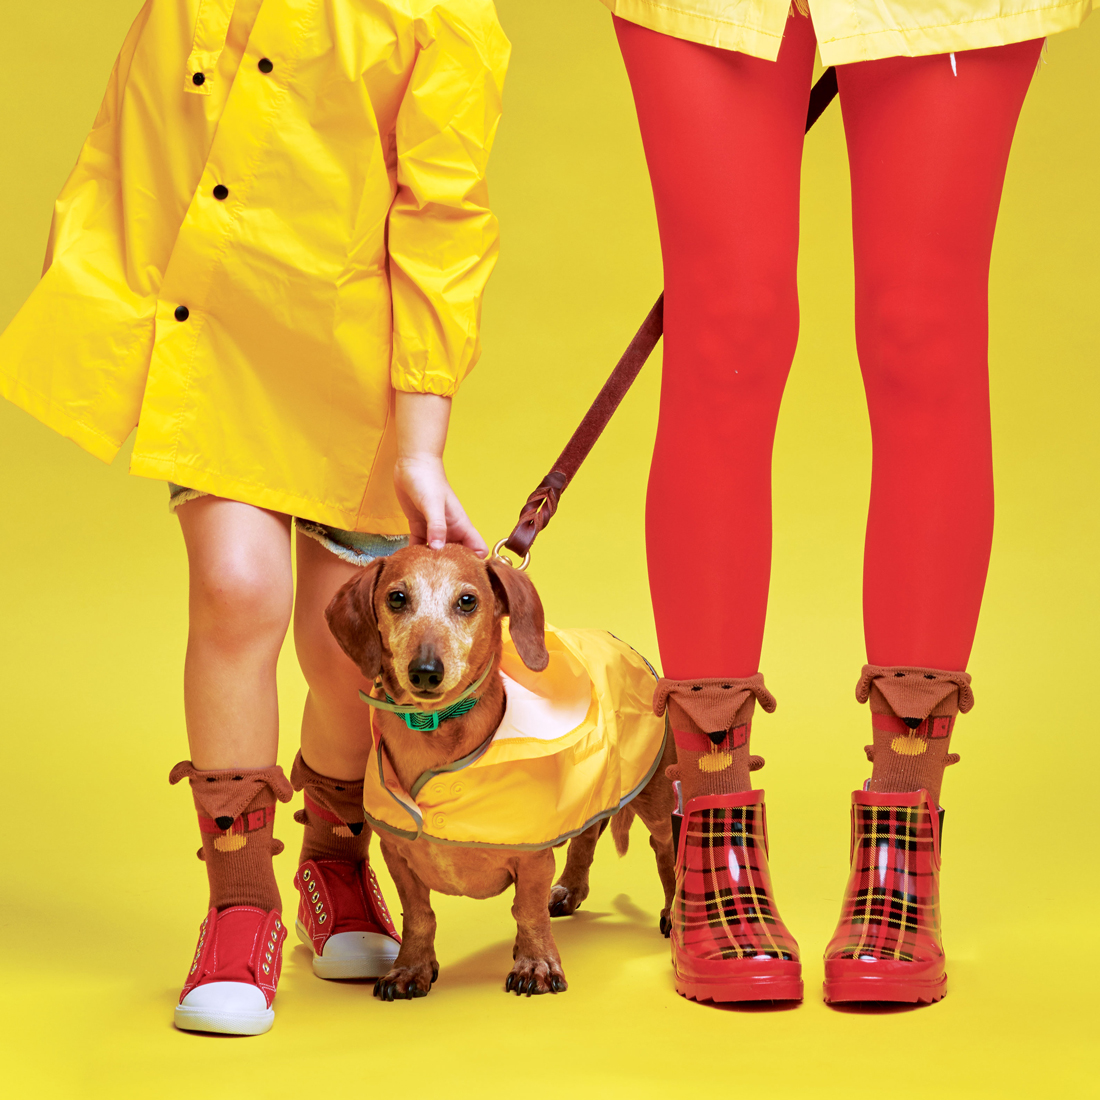 Woman in red tights and little girl, both wearing bright yellow raincoats, 3D dachshund weiner dog socks, and red rainboots, with a dachshund weiner dog in the middle, also wearing a yellow raincoat, on a bright yellow background.